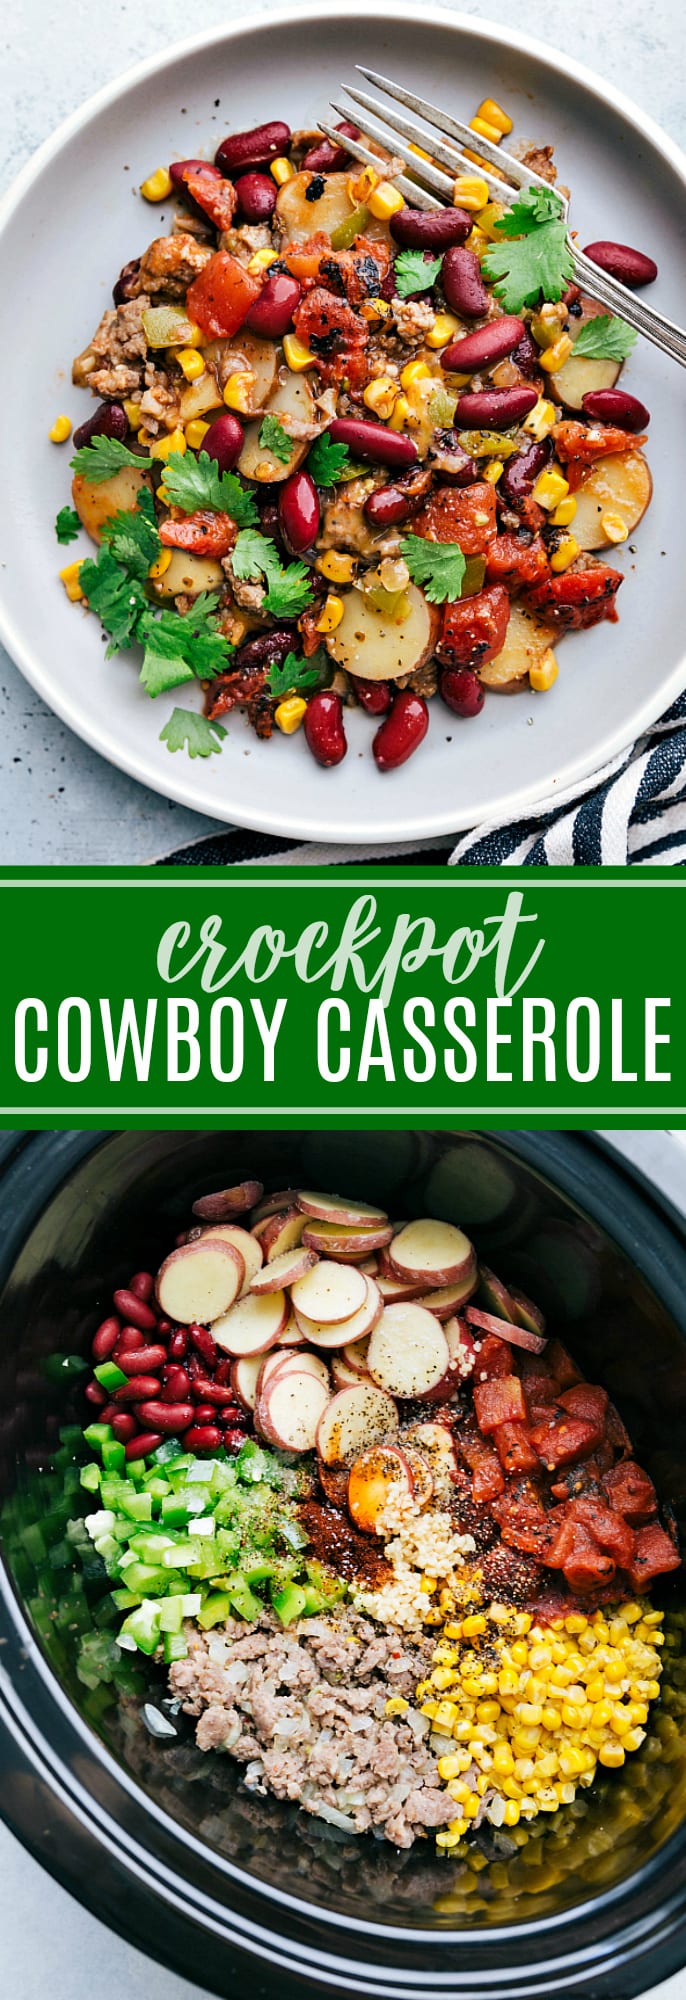 The ultimate BEST EVER Crockpot Cowboy Casserole! A super easy and quick ONE DISH dinner! via chelseasmessyapron.com #crockpot #slowcooker #cowboy #casserole #easy #quick #dinner #kidfriendly #healthy #beans #corn #sausage #potatoes #dinner